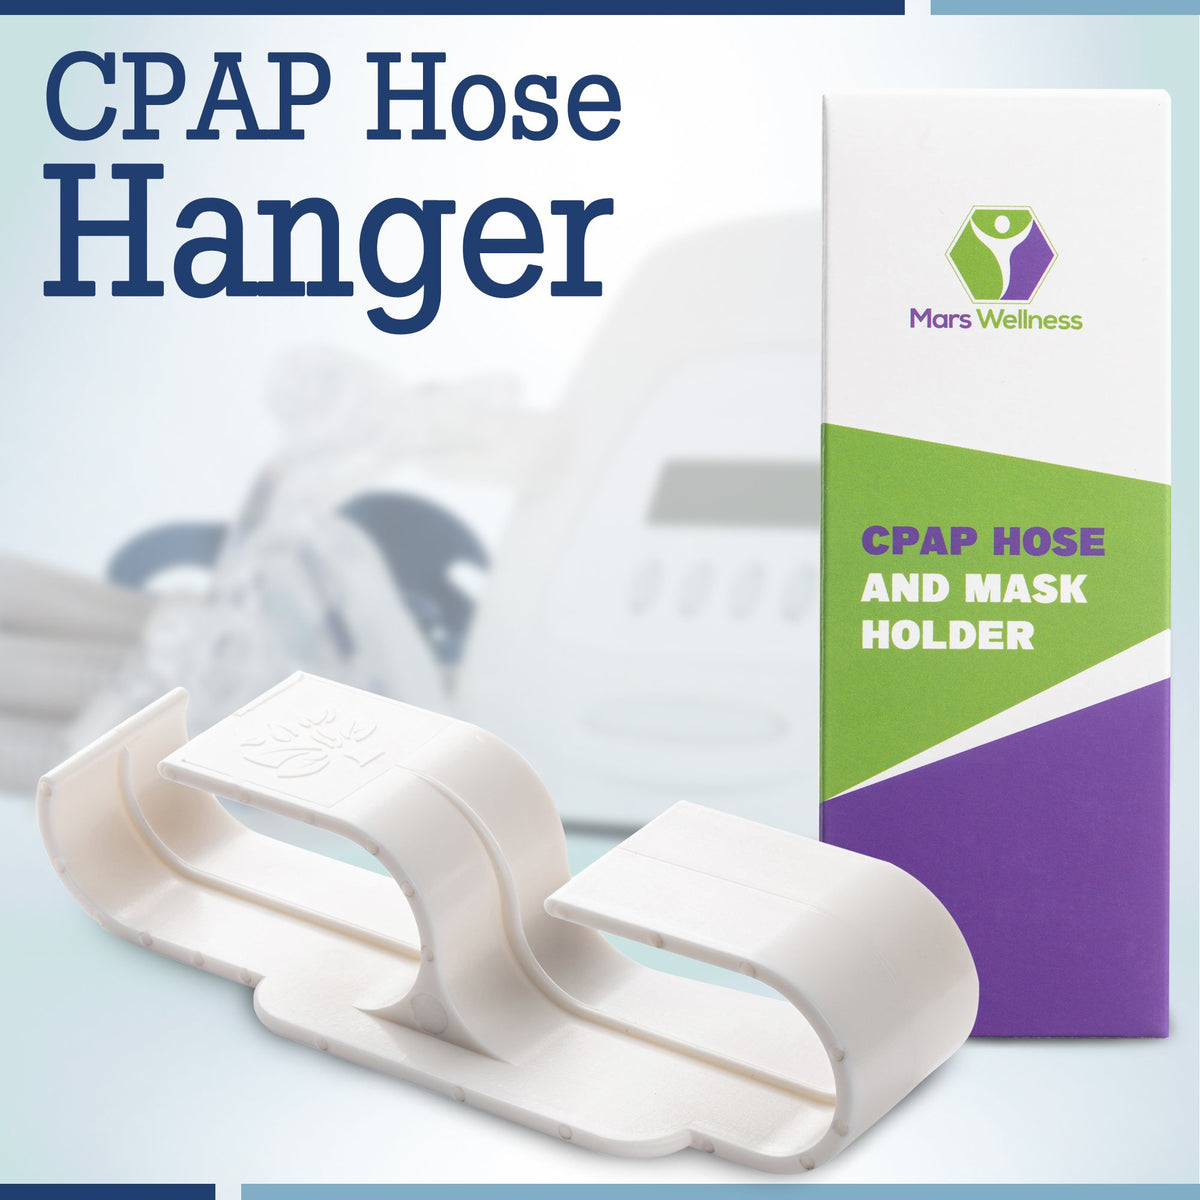 CPAP Hose Holder Mask Holder - Easy to Install Plastic CPAP Accessories for CPAP Machines - Easy to Use CPAP Supplies - Double Hook CPAP Tube Holder